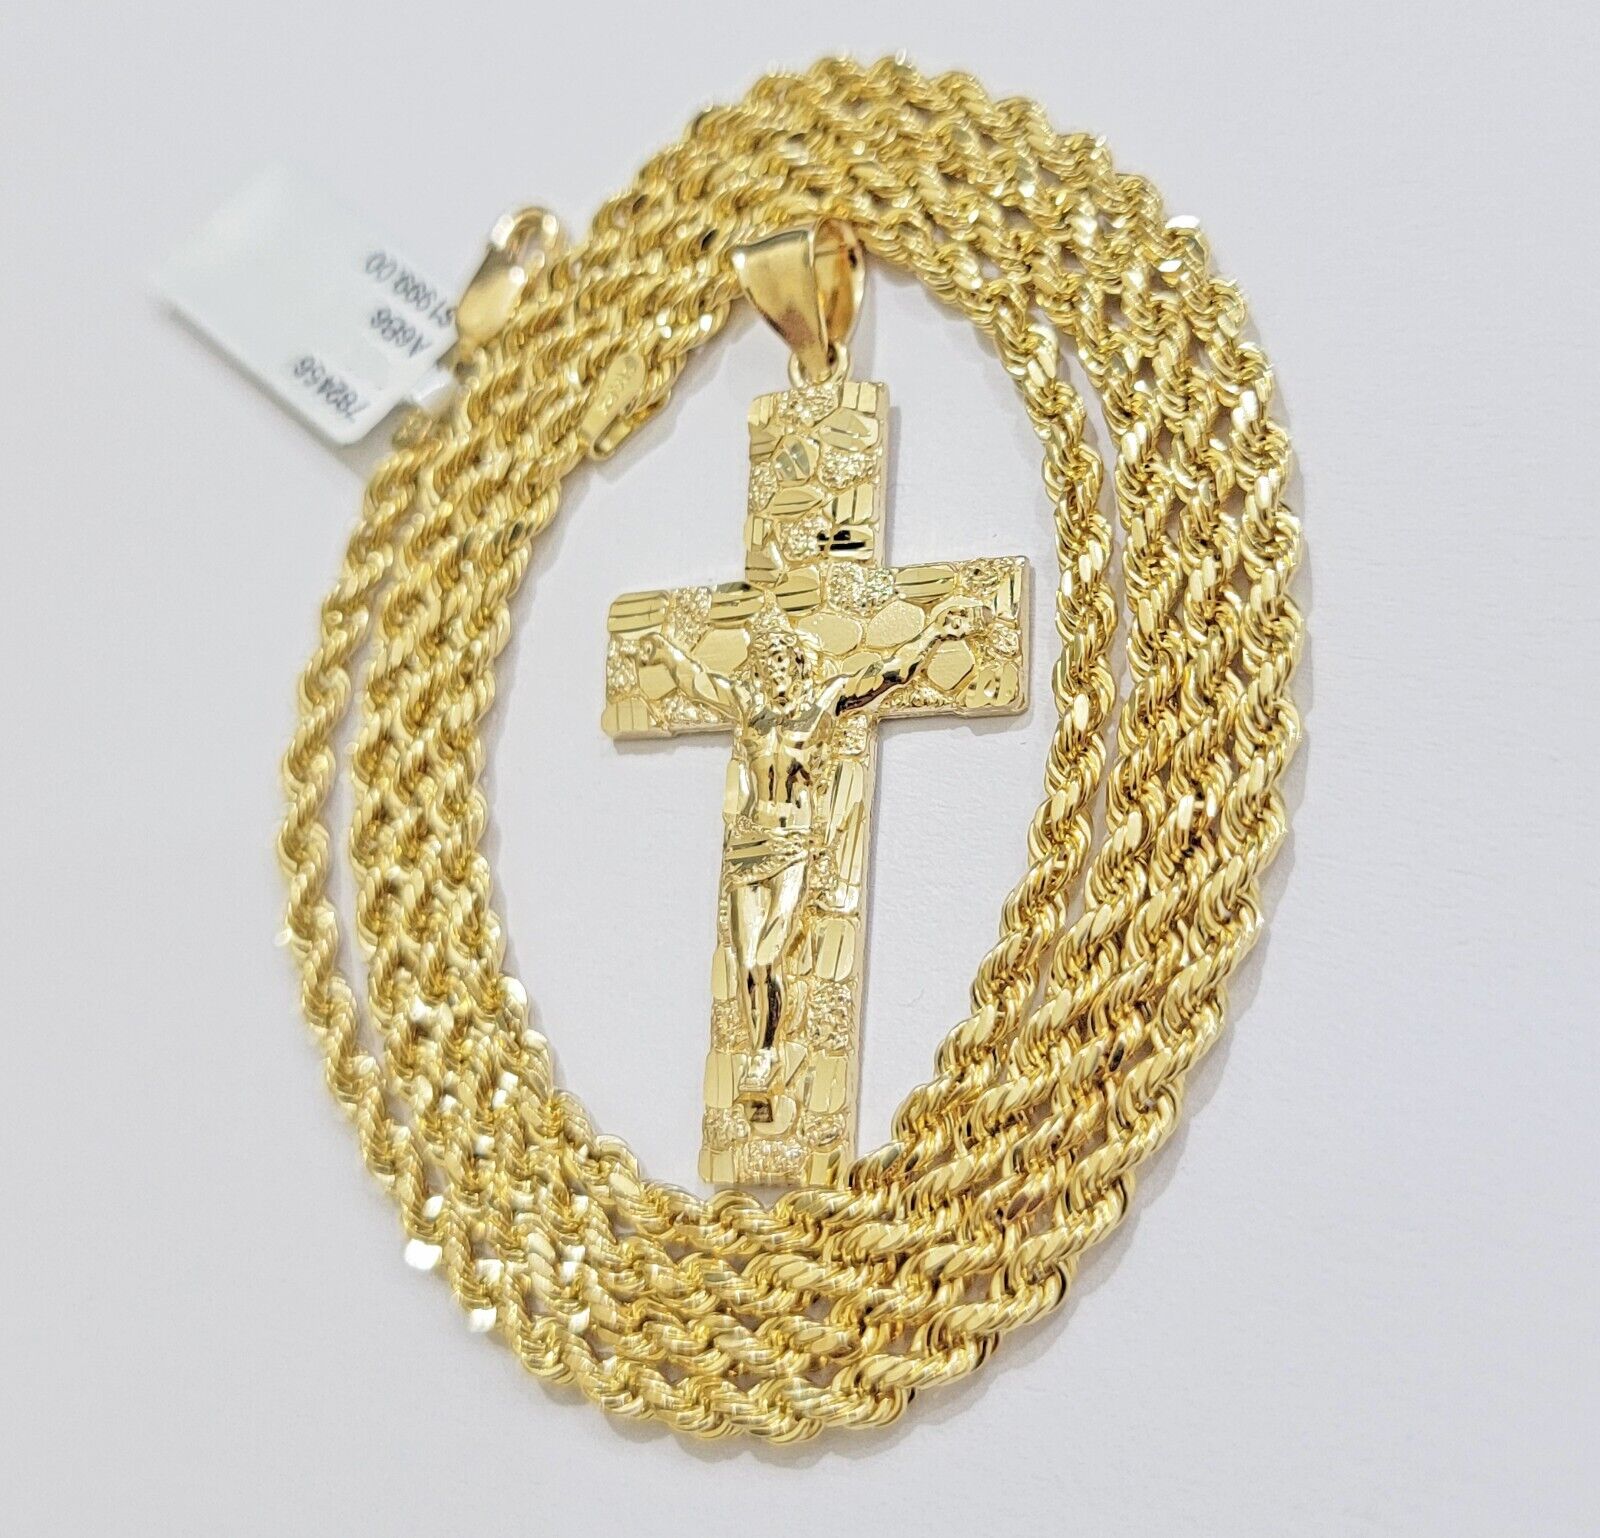 10k Yellow Gold Rope Chain Nugget Cross Charm Set 26 Inch necklace pendant, REAL